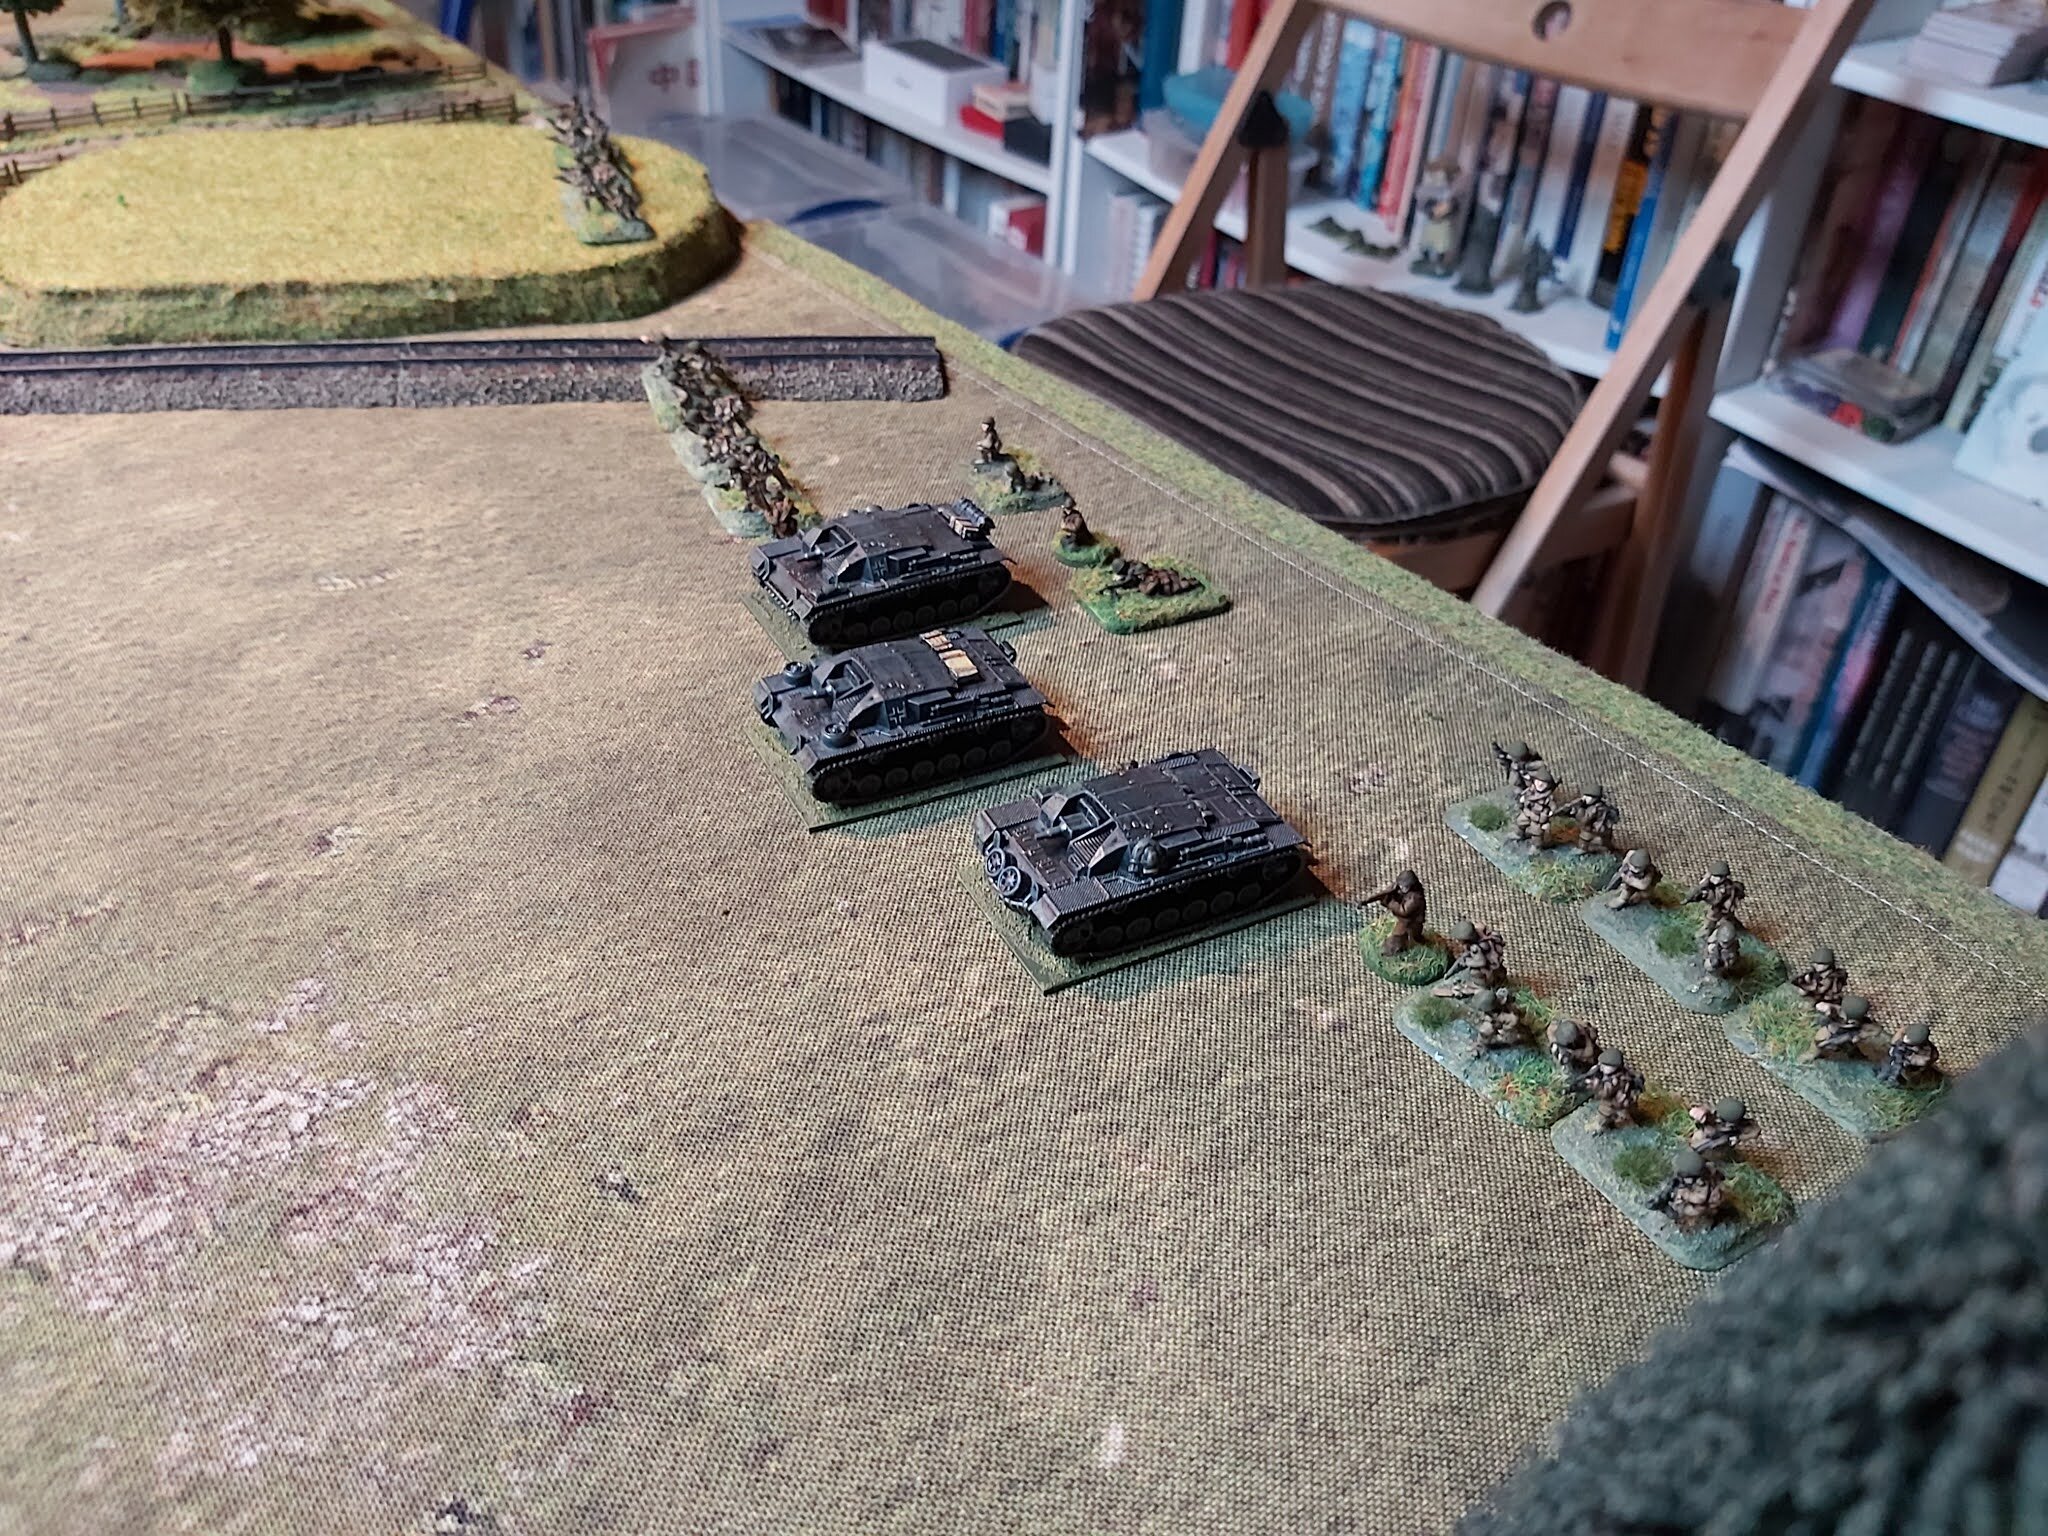 The Romanians consisted of two platoons of infantry, each with about 40 men in, one supported on the left flank by three StuG IIIs that had joined their cause. 